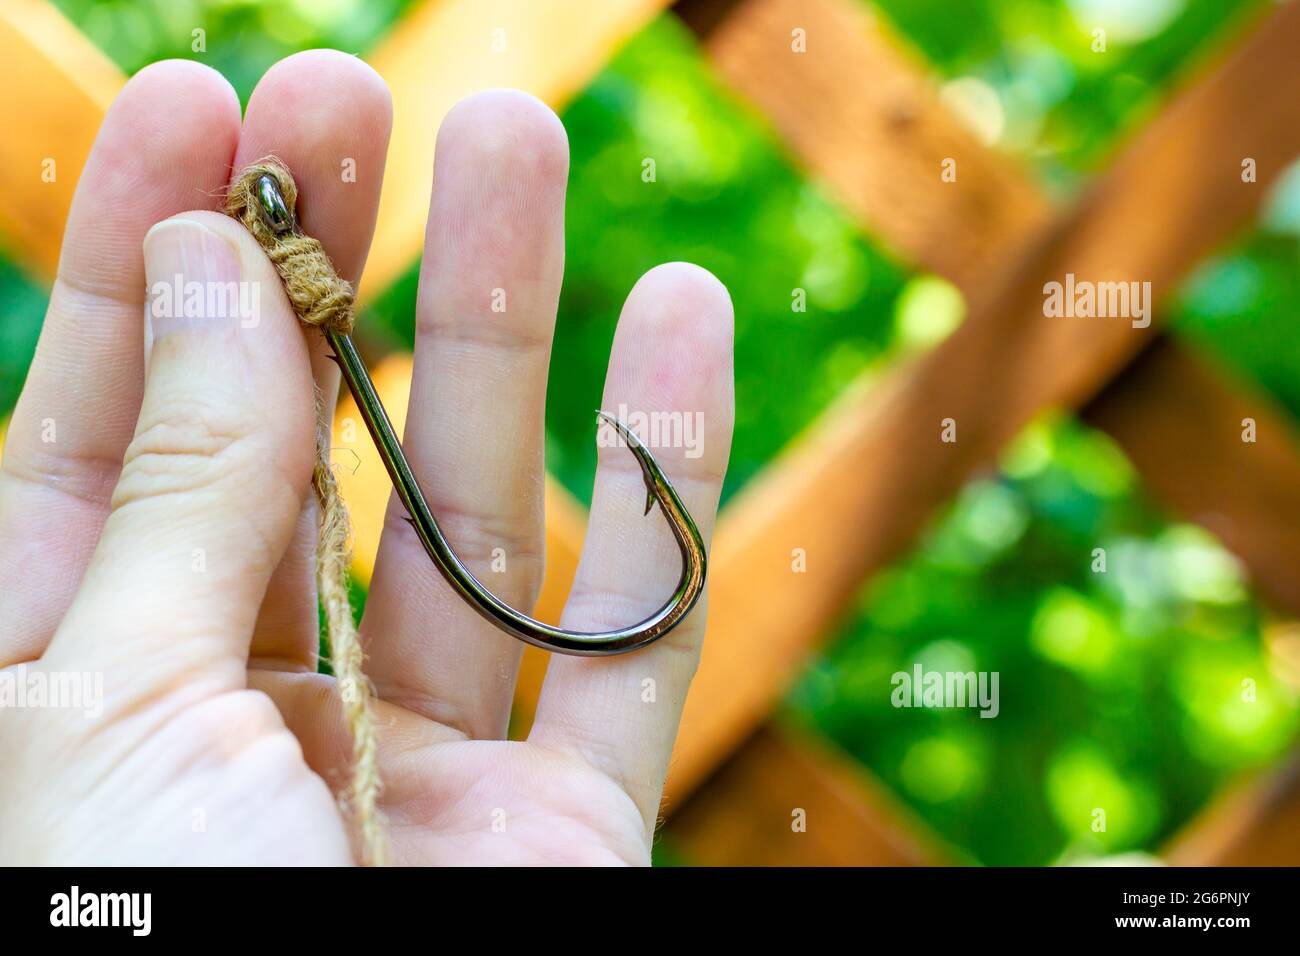 https://c8.alamy.com/comp/2G6PNJY/a-human-hand-holds-a-large-fishing-hook-hook-for-large-fish-2G6PNJY.jpg